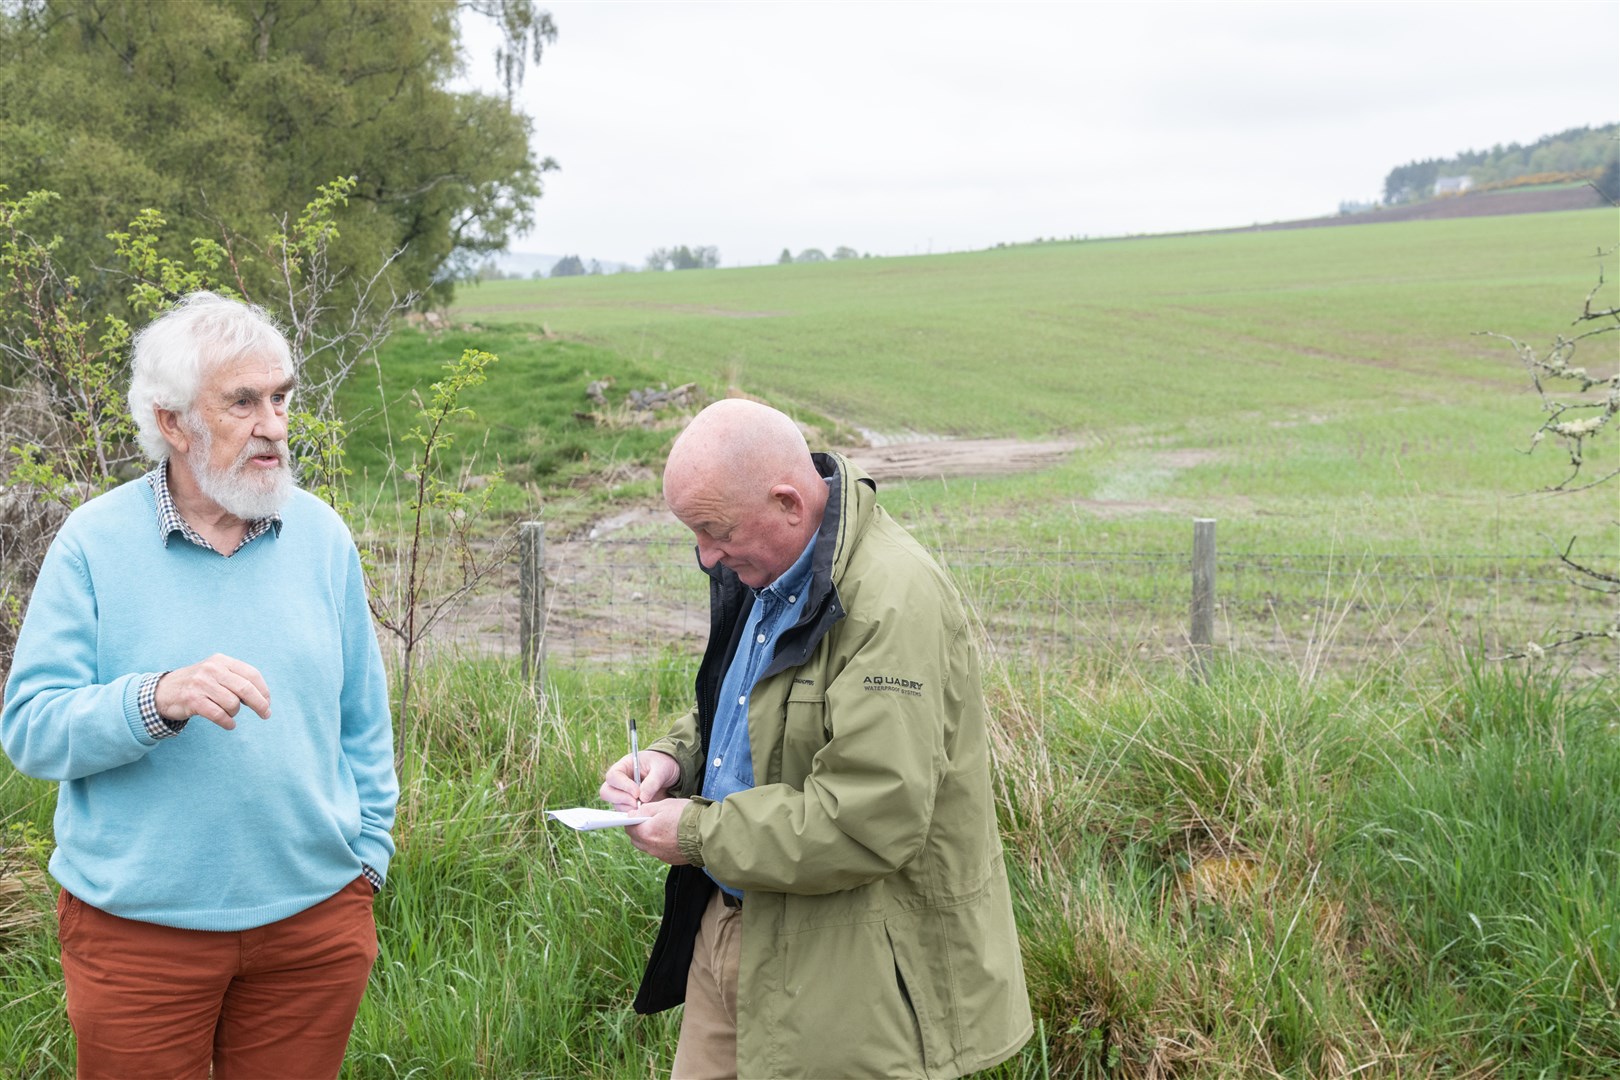 Alan Soutar (left) and Councillor for Speyside Glenlivet, Derek Ross (right) discussing the floods in Aberlour...Picture: Beth Taylor.